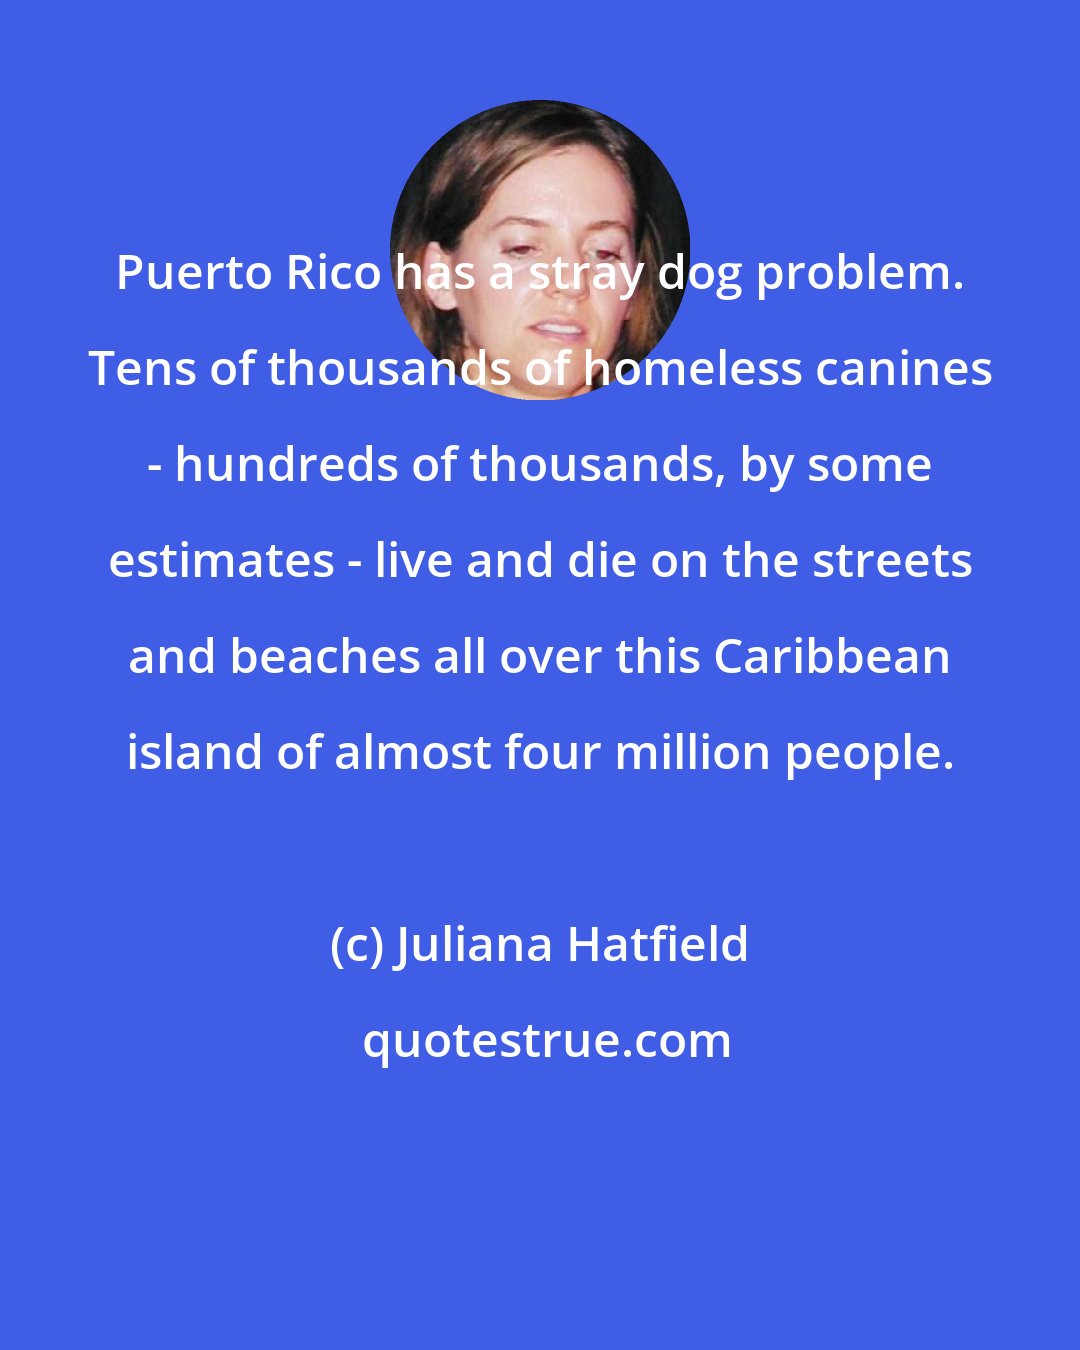 Juliana Hatfield: Puerto Rico has a stray dog problem. Tens of thousands of homeless canines - hundreds of thousands, by some estimates - live and die on the streets and beaches all over this Caribbean island of almost four million people.